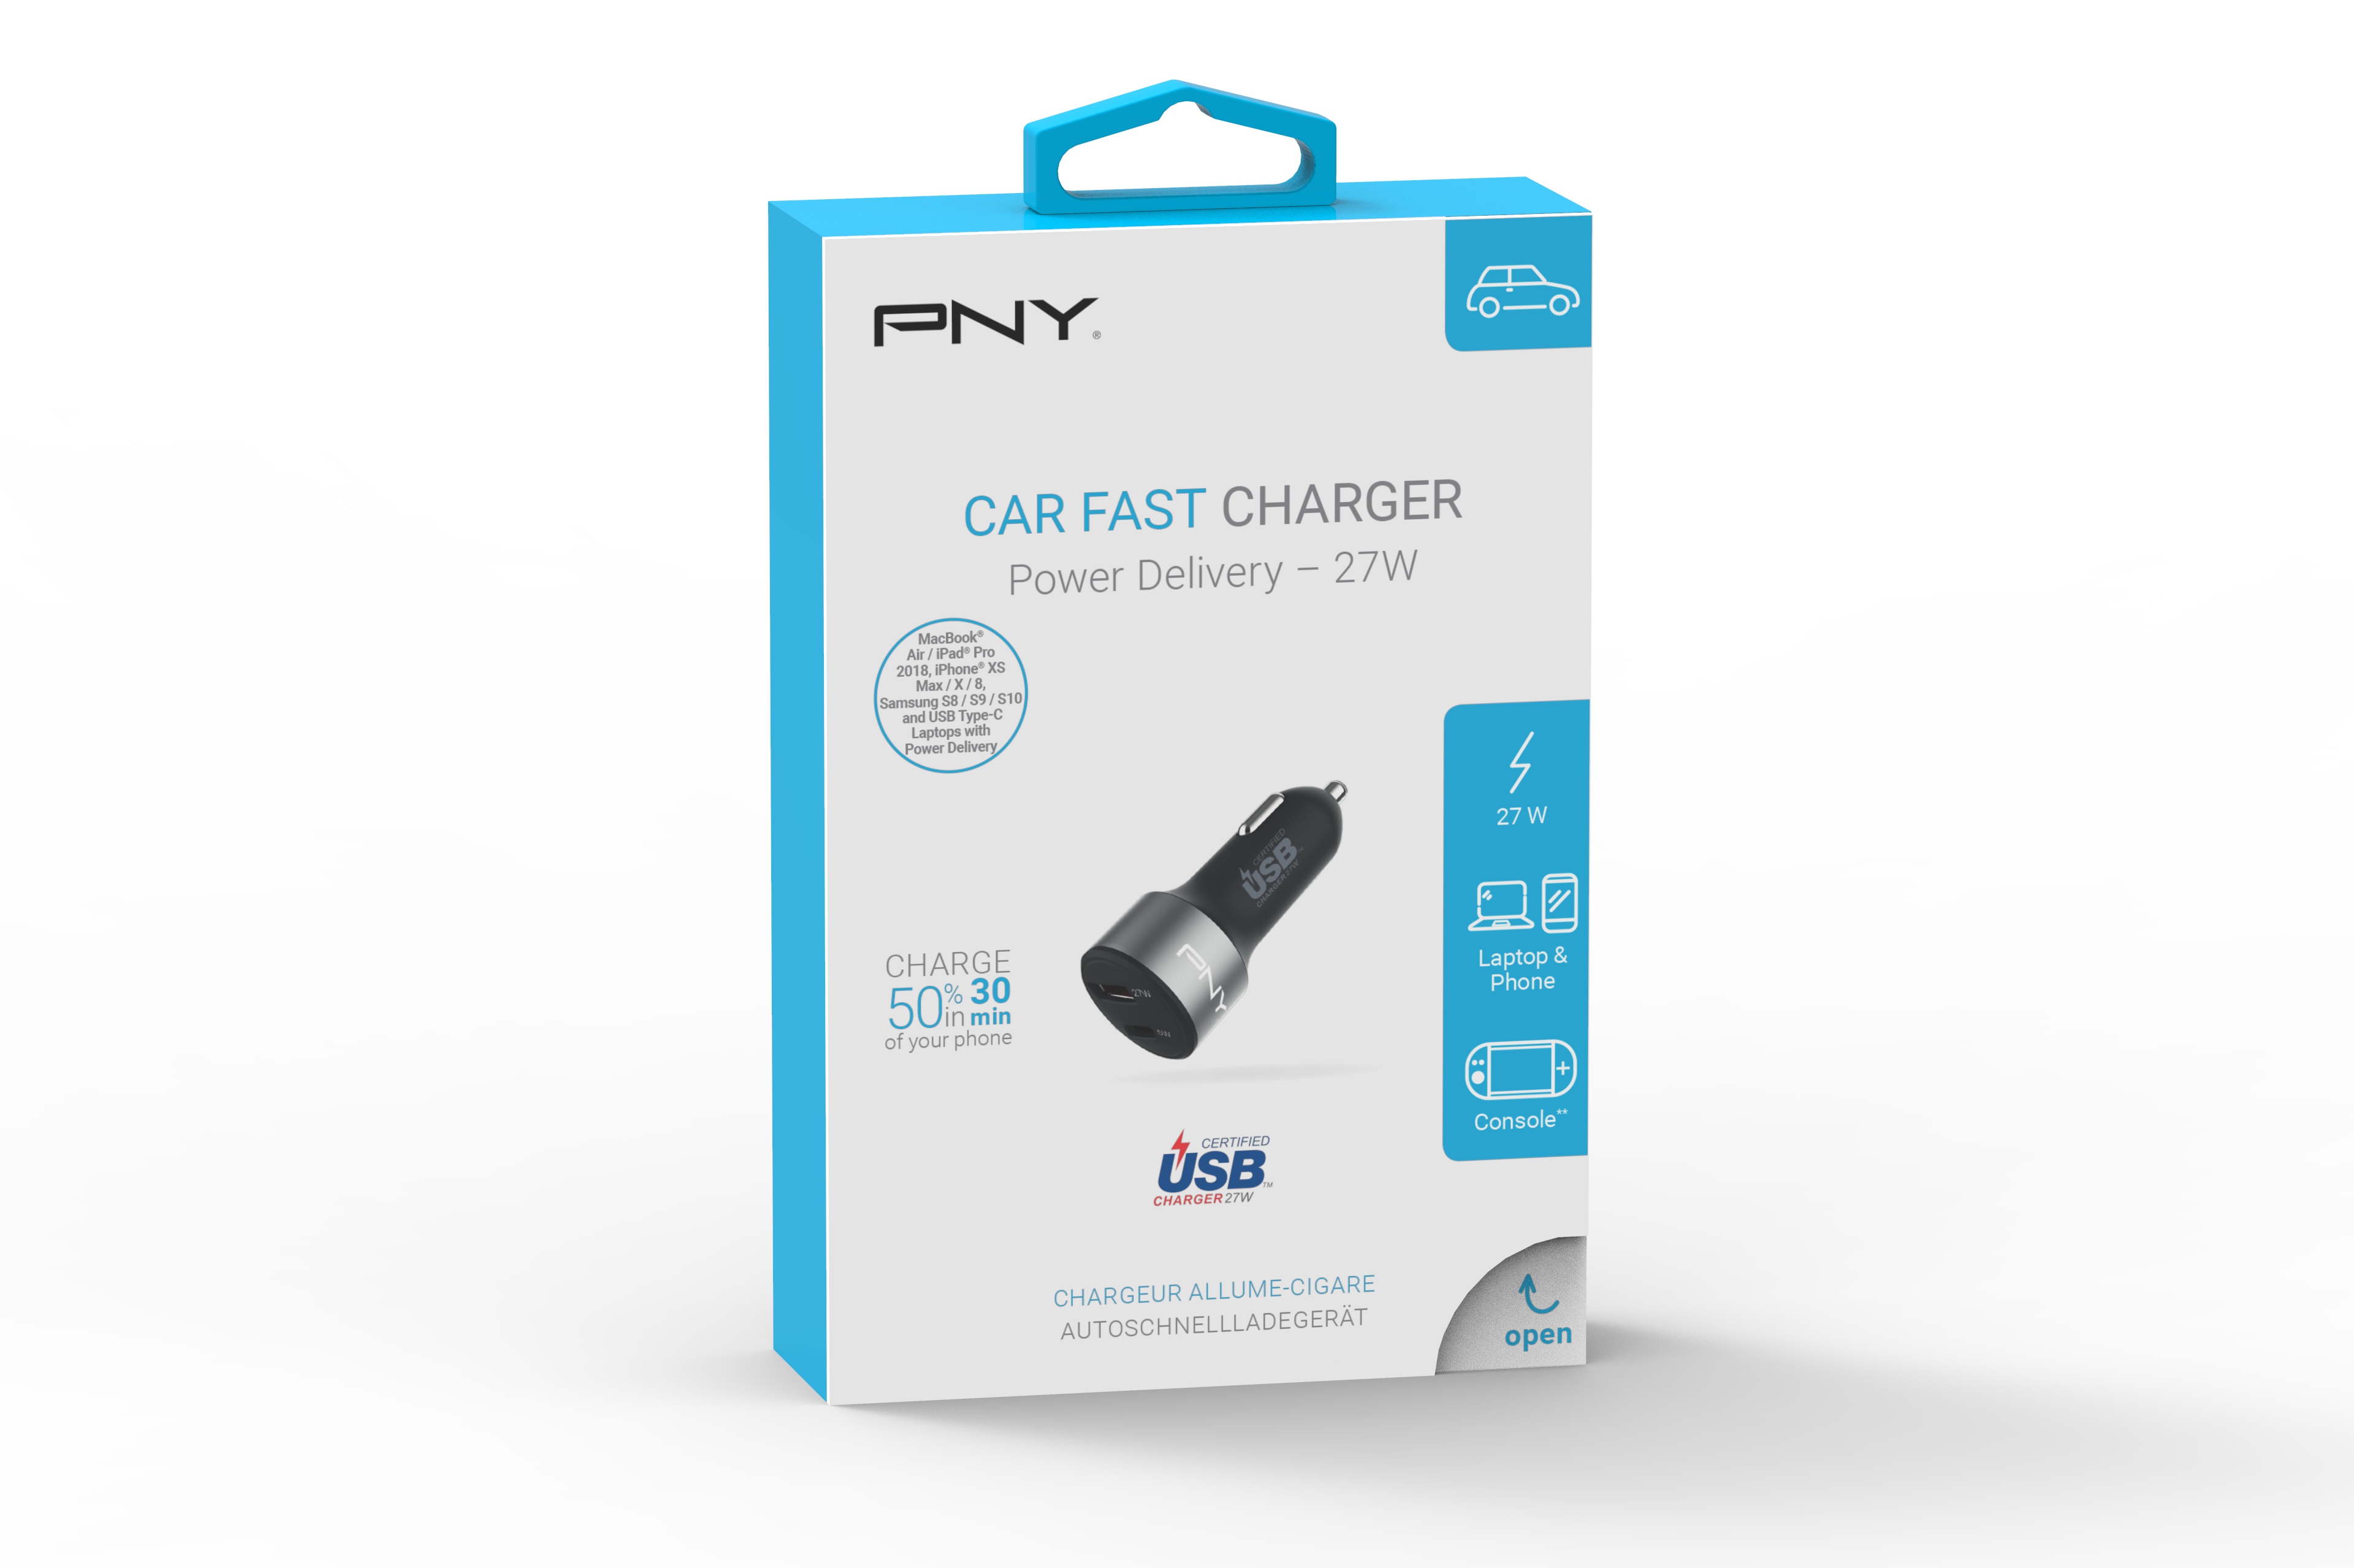 PNY_Car_Charger_USB-C_Power-Delivery_Packaging.jpg